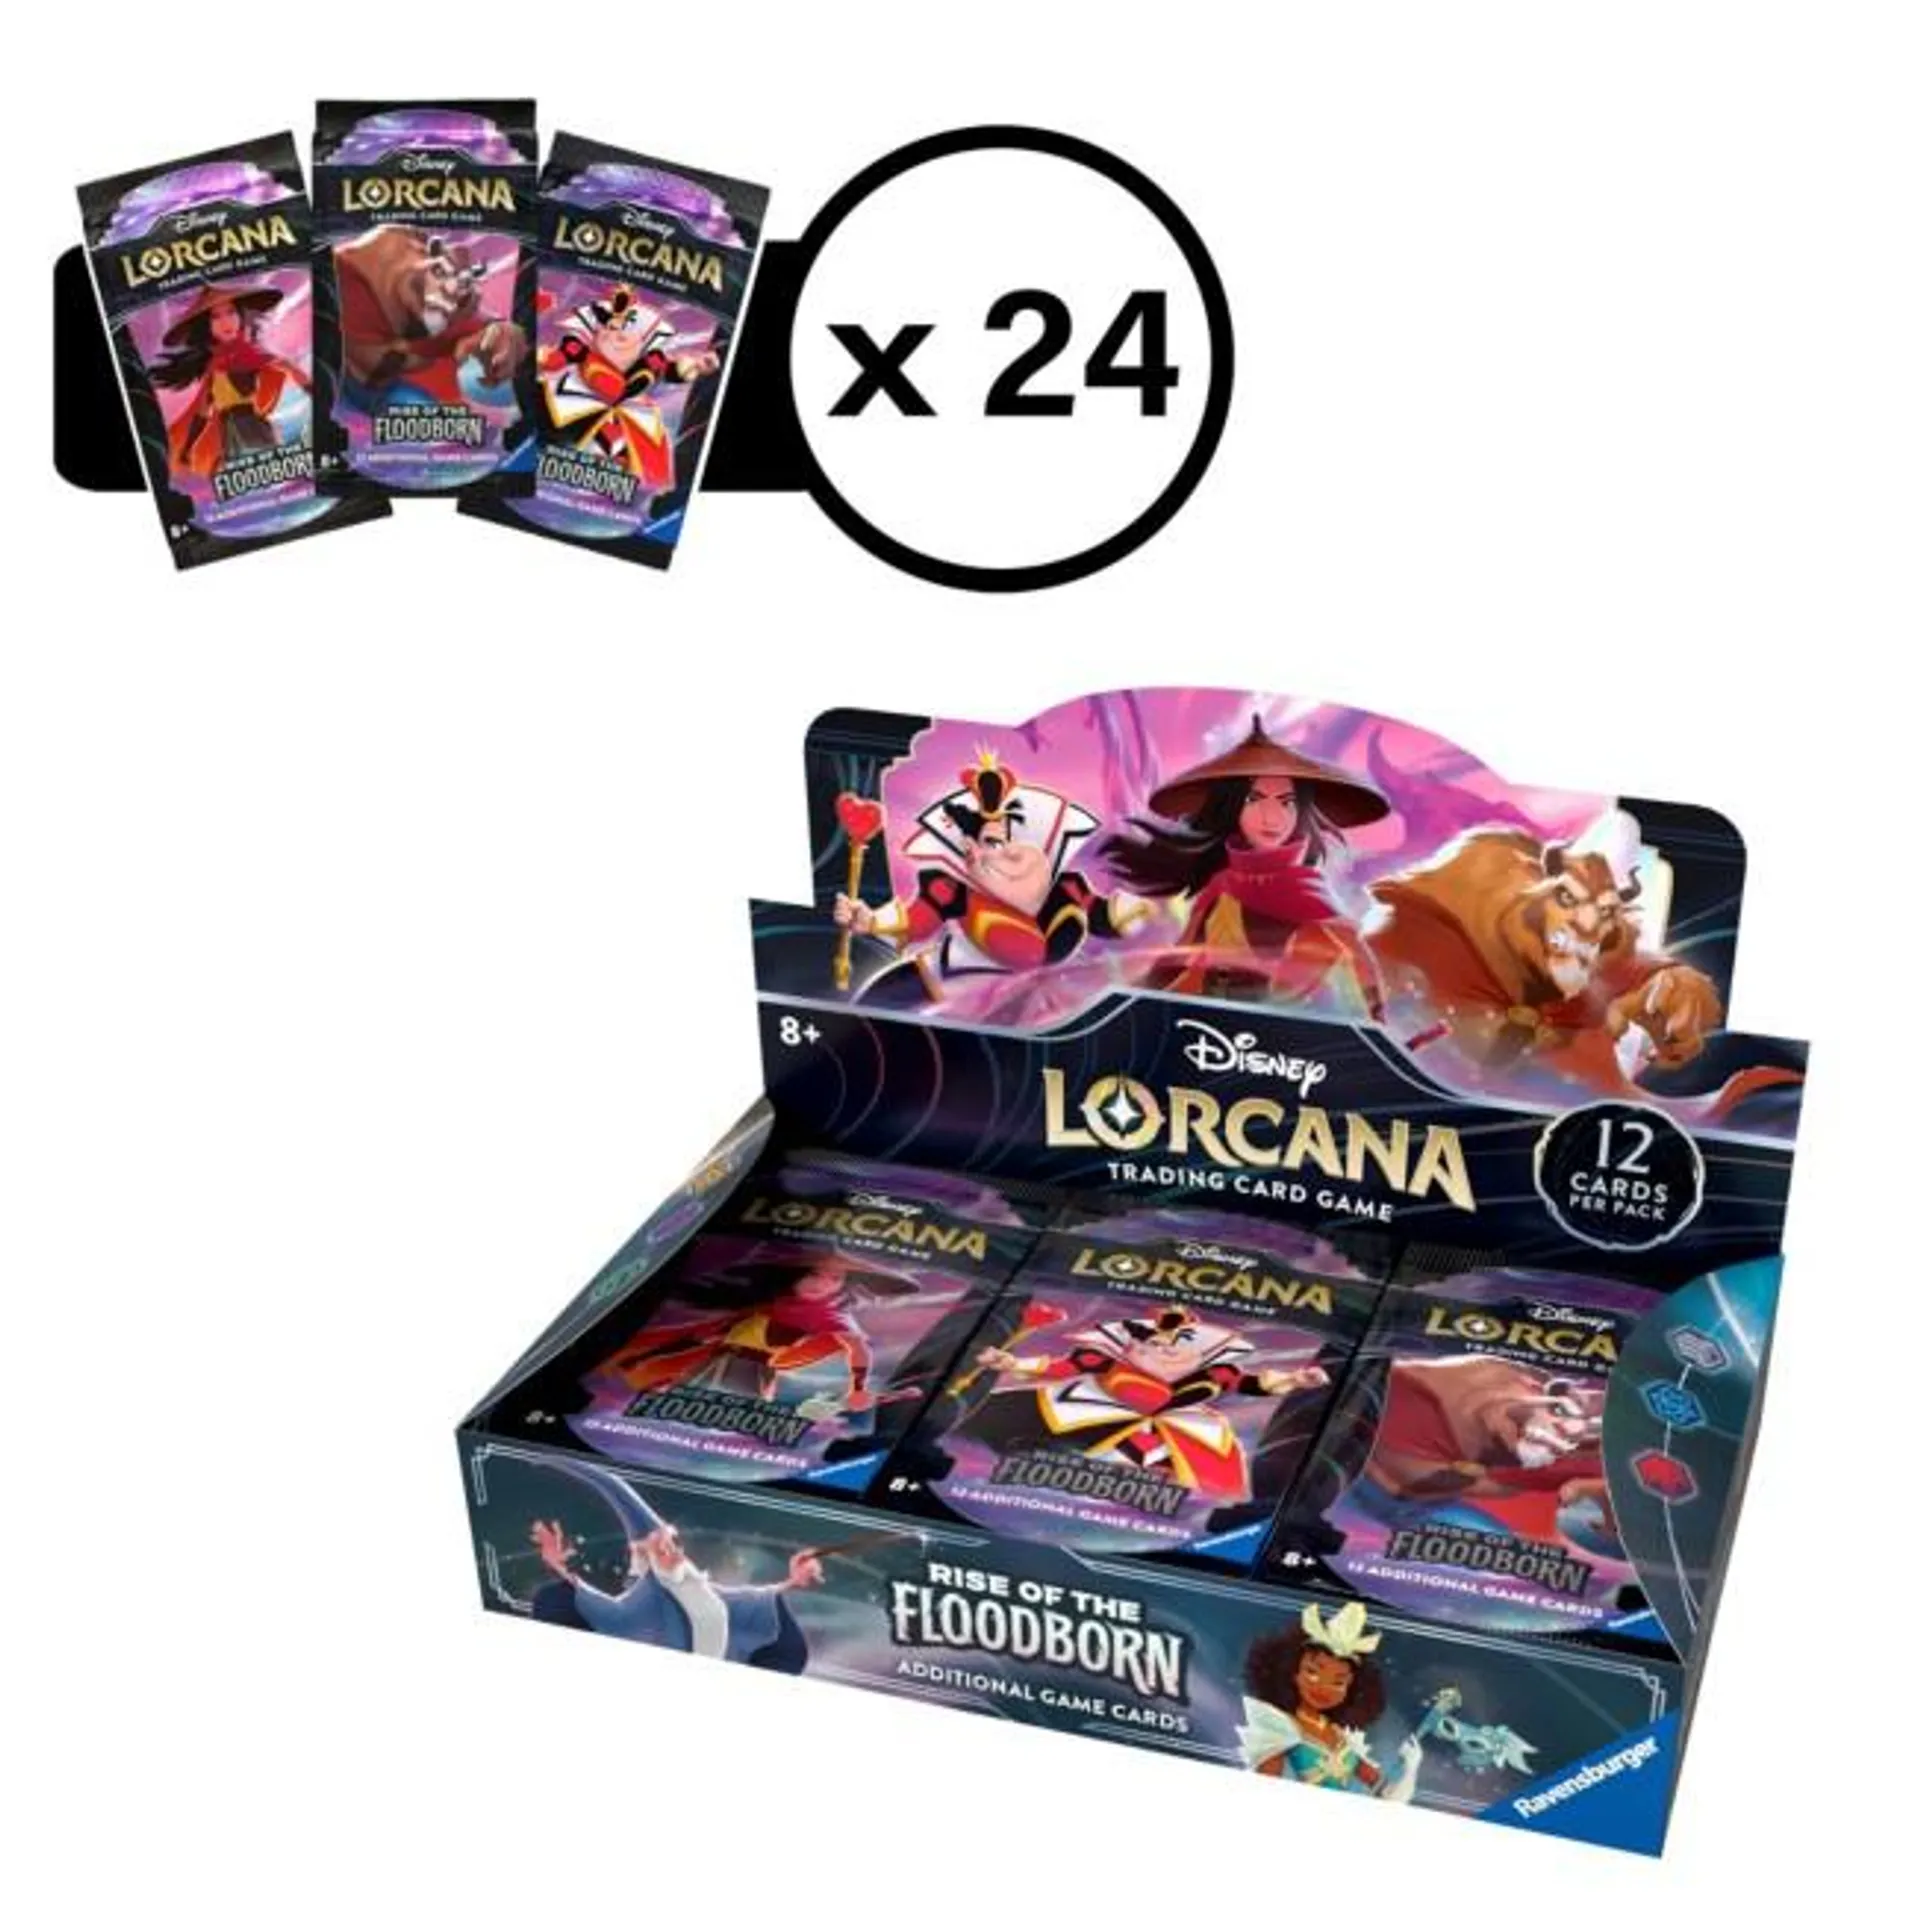 Ravensburger Disney Lorcana Trading Card Game Booster Pack, Pack of 24